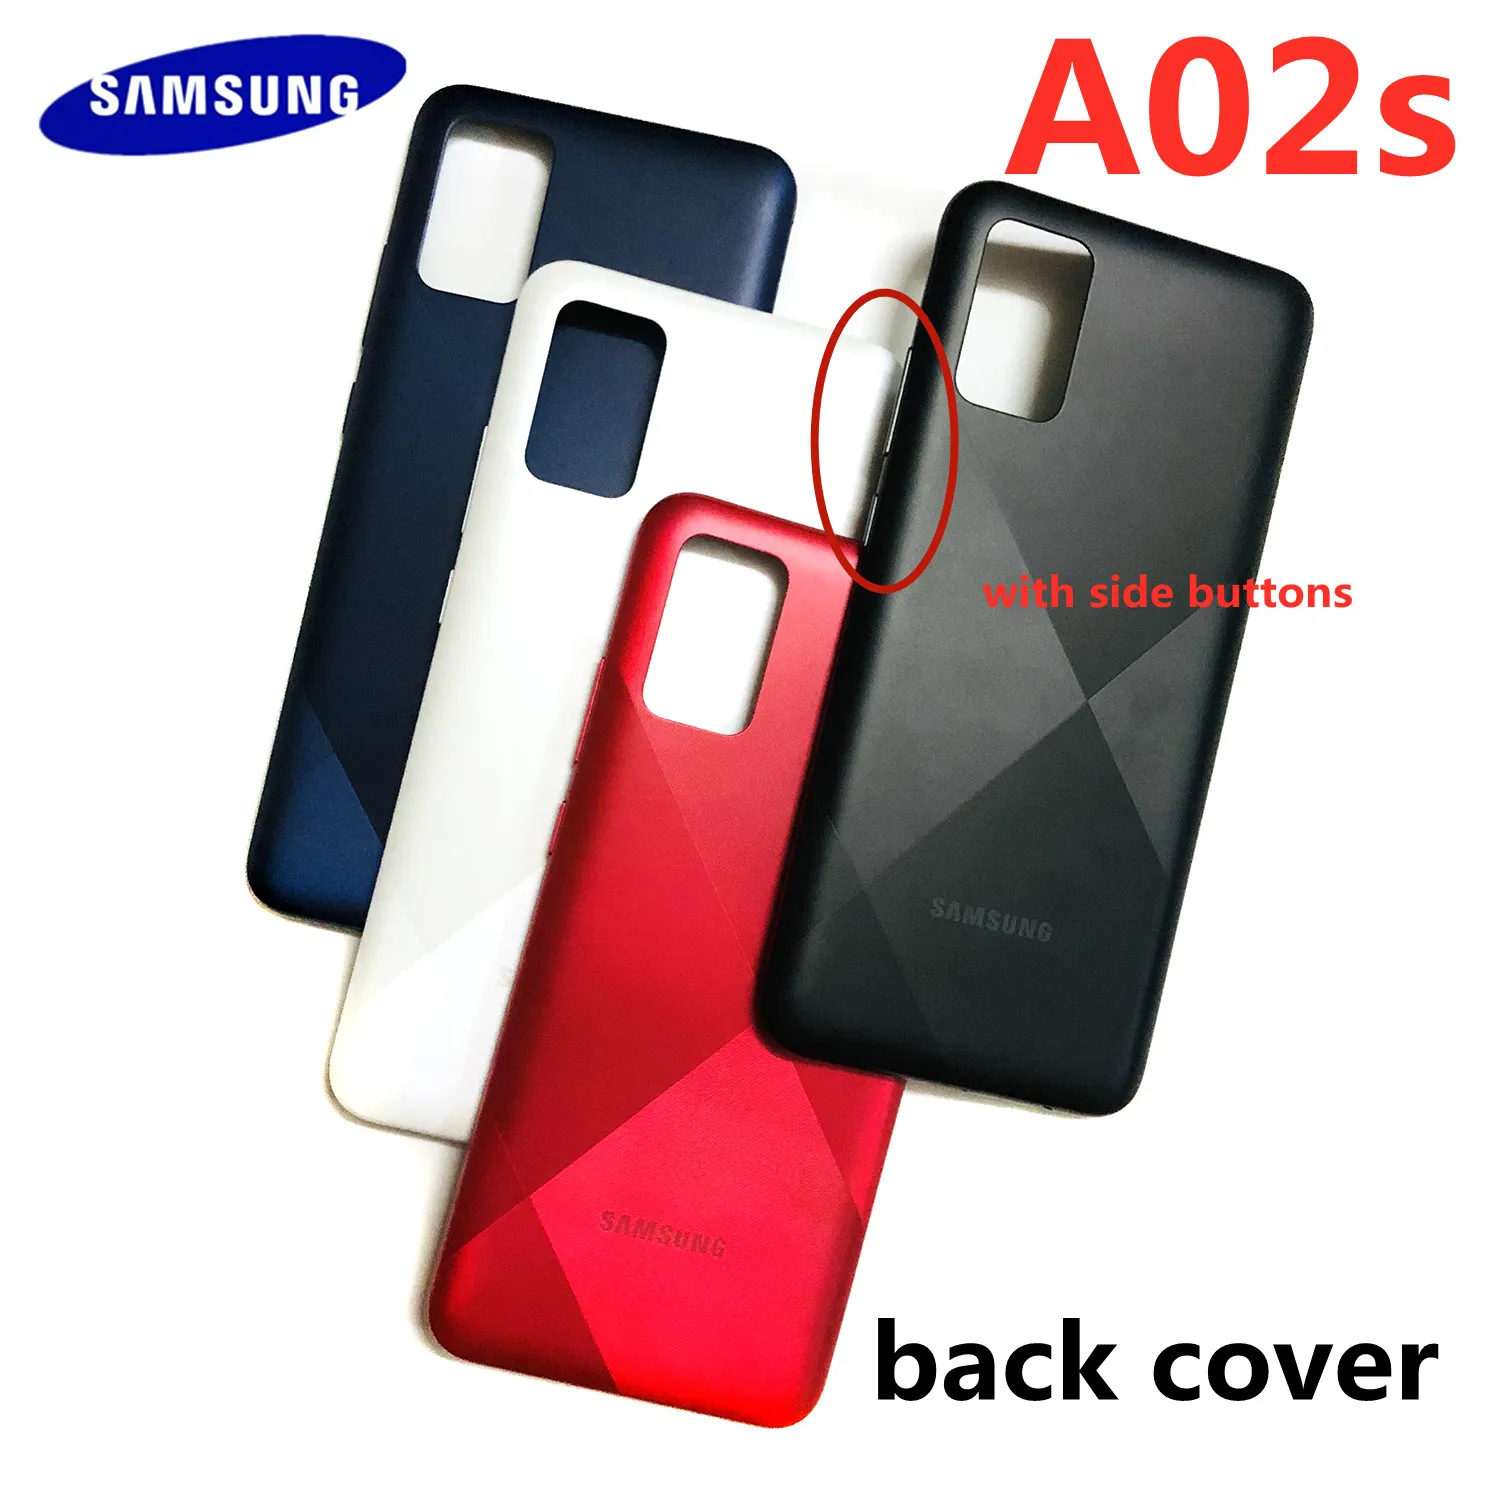 

For Samsung Galaxy A02s A025 A025M Battery Back Cover Rear Door Phone Housing Case + Side Buttons Panel Chassis Lid Replacement